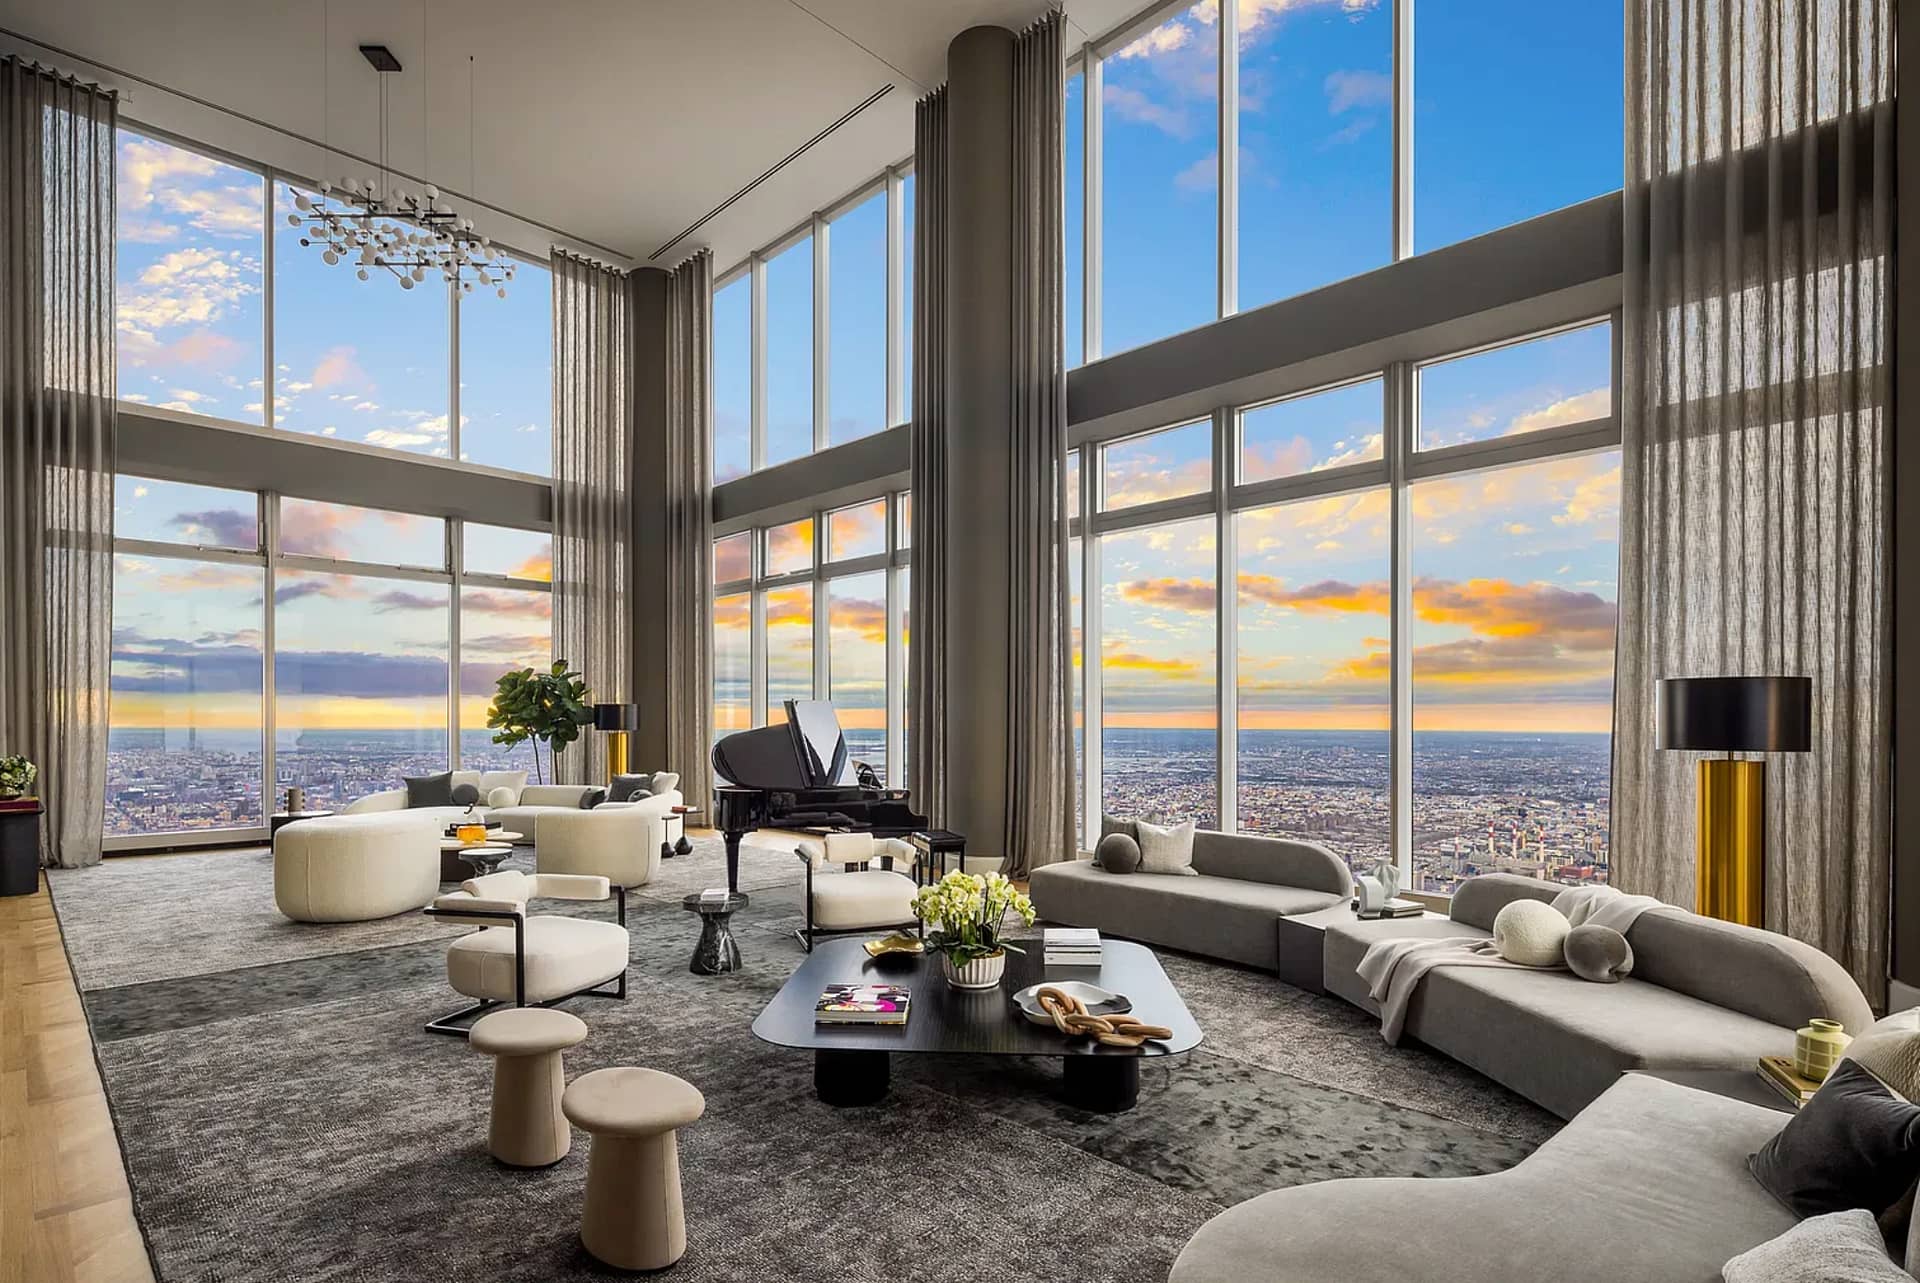 See Inside the Most Expensive US Home, a $250 Million NYC Penthouse